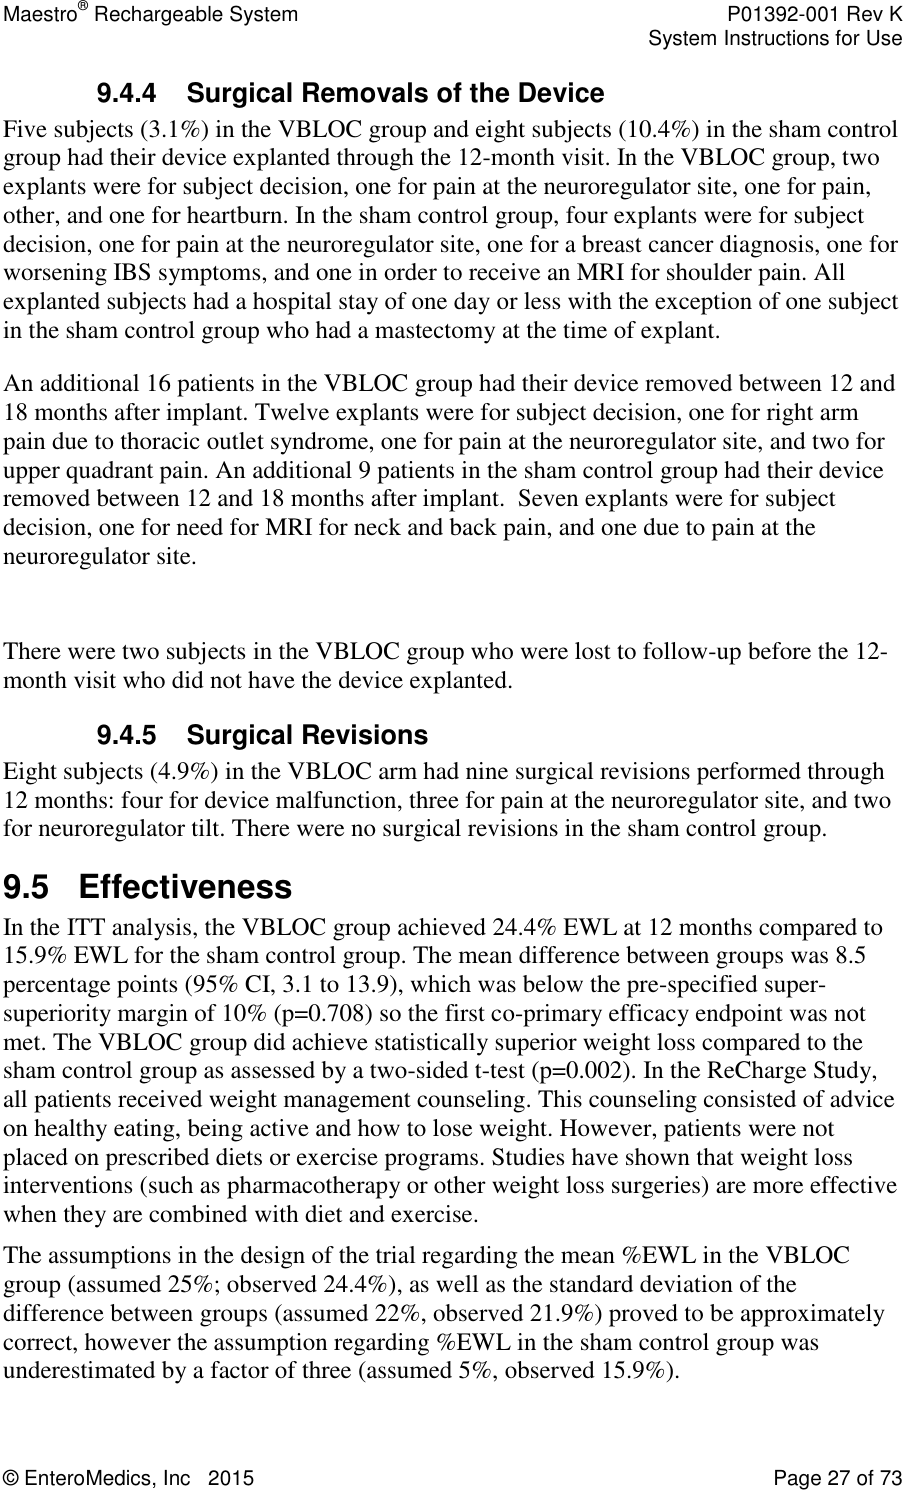 Maestro® Rechargeable System    P01392-001 Rev K     System Instructions for Use  © EnteroMedics, Inc   2015  Page 27 of 73  9.4.4 Surgical Removals of the Device  Five subjects (3.1%) in the VBLOC group and eight subjects (10.4%) in the sham control group had their device explanted through the 12-month visit. In the VBLOC group, two explants were for subject decision, one for pain at the neuroregulator site, one for pain, other, and one for heartburn. In the sham control group, four explants were for subject decision, one for pain at the neuroregulator site, one for a breast cancer diagnosis, one for worsening IBS symptoms, and one in order to receive an MRI for shoulder pain. All explanted subjects had a hospital stay of one day or less with the exception of one subject in the sham control group who had a mastectomy at the time of explant. An additional 16 patients in the VBLOC group had their device removed between 12 and 18 months after implant. Twelve explants were for subject decision, one for right arm pain due to thoracic outlet syndrome, one for pain at the neuroregulator site, and two for upper quadrant pain. An additional 9 patients in the sham control group had their device removed between 12 and 18 months after implant.  Seven explants were for subject decision, one for need for MRI for neck and back pain, and one due to pain at the neuroregulator site.   There were two subjects in the VBLOC group who were lost to follow-up before the 12-month visit who did not have the device explanted. 9.4.5 Surgical Revisions Eight subjects (4.9%) in the VBLOC arm had nine surgical revisions performed through 12 months: four for device malfunction, three for pain at the neuroregulator site, and two for neuroregulator tilt. There were no surgical revisions in the sham control group.   9.5  Effectiveness In the ITT analysis, the VBLOC group achieved 24.4% EWL at 12 months compared to 15.9% EWL for the sham control group. The mean difference between groups was 8.5 percentage points (95% CI, 3.1 to 13.9), which was below the pre-specified super-superiority margin of 10% (p=0.708) so the first co-primary efficacy endpoint was not met. The VBLOC group did achieve statistically superior weight loss compared to the sham control group as assessed by a two-sided t-test (p=0.002). In the ReCharge Study, all patients received weight management counseling. This counseling consisted of advice on healthy eating, being active and how to lose weight. However, patients were not placed on prescribed diets or exercise programs. Studies have shown that weight loss interventions (such as pharmacotherapy or other weight loss surgeries) are more effective when they are combined with diet and exercise. The assumptions in the design of the trial regarding the mean %EWL in the VBLOC group (assumed 25%; observed 24.4%), as well as the standard deviation of the difference between groups (assumed 22%, observed 21.9%) proved to be approximately correct, however the assumption regarding %EWL in the sham control group was underestimated by a factor of three (assumed 5%, observed 15.9%).  